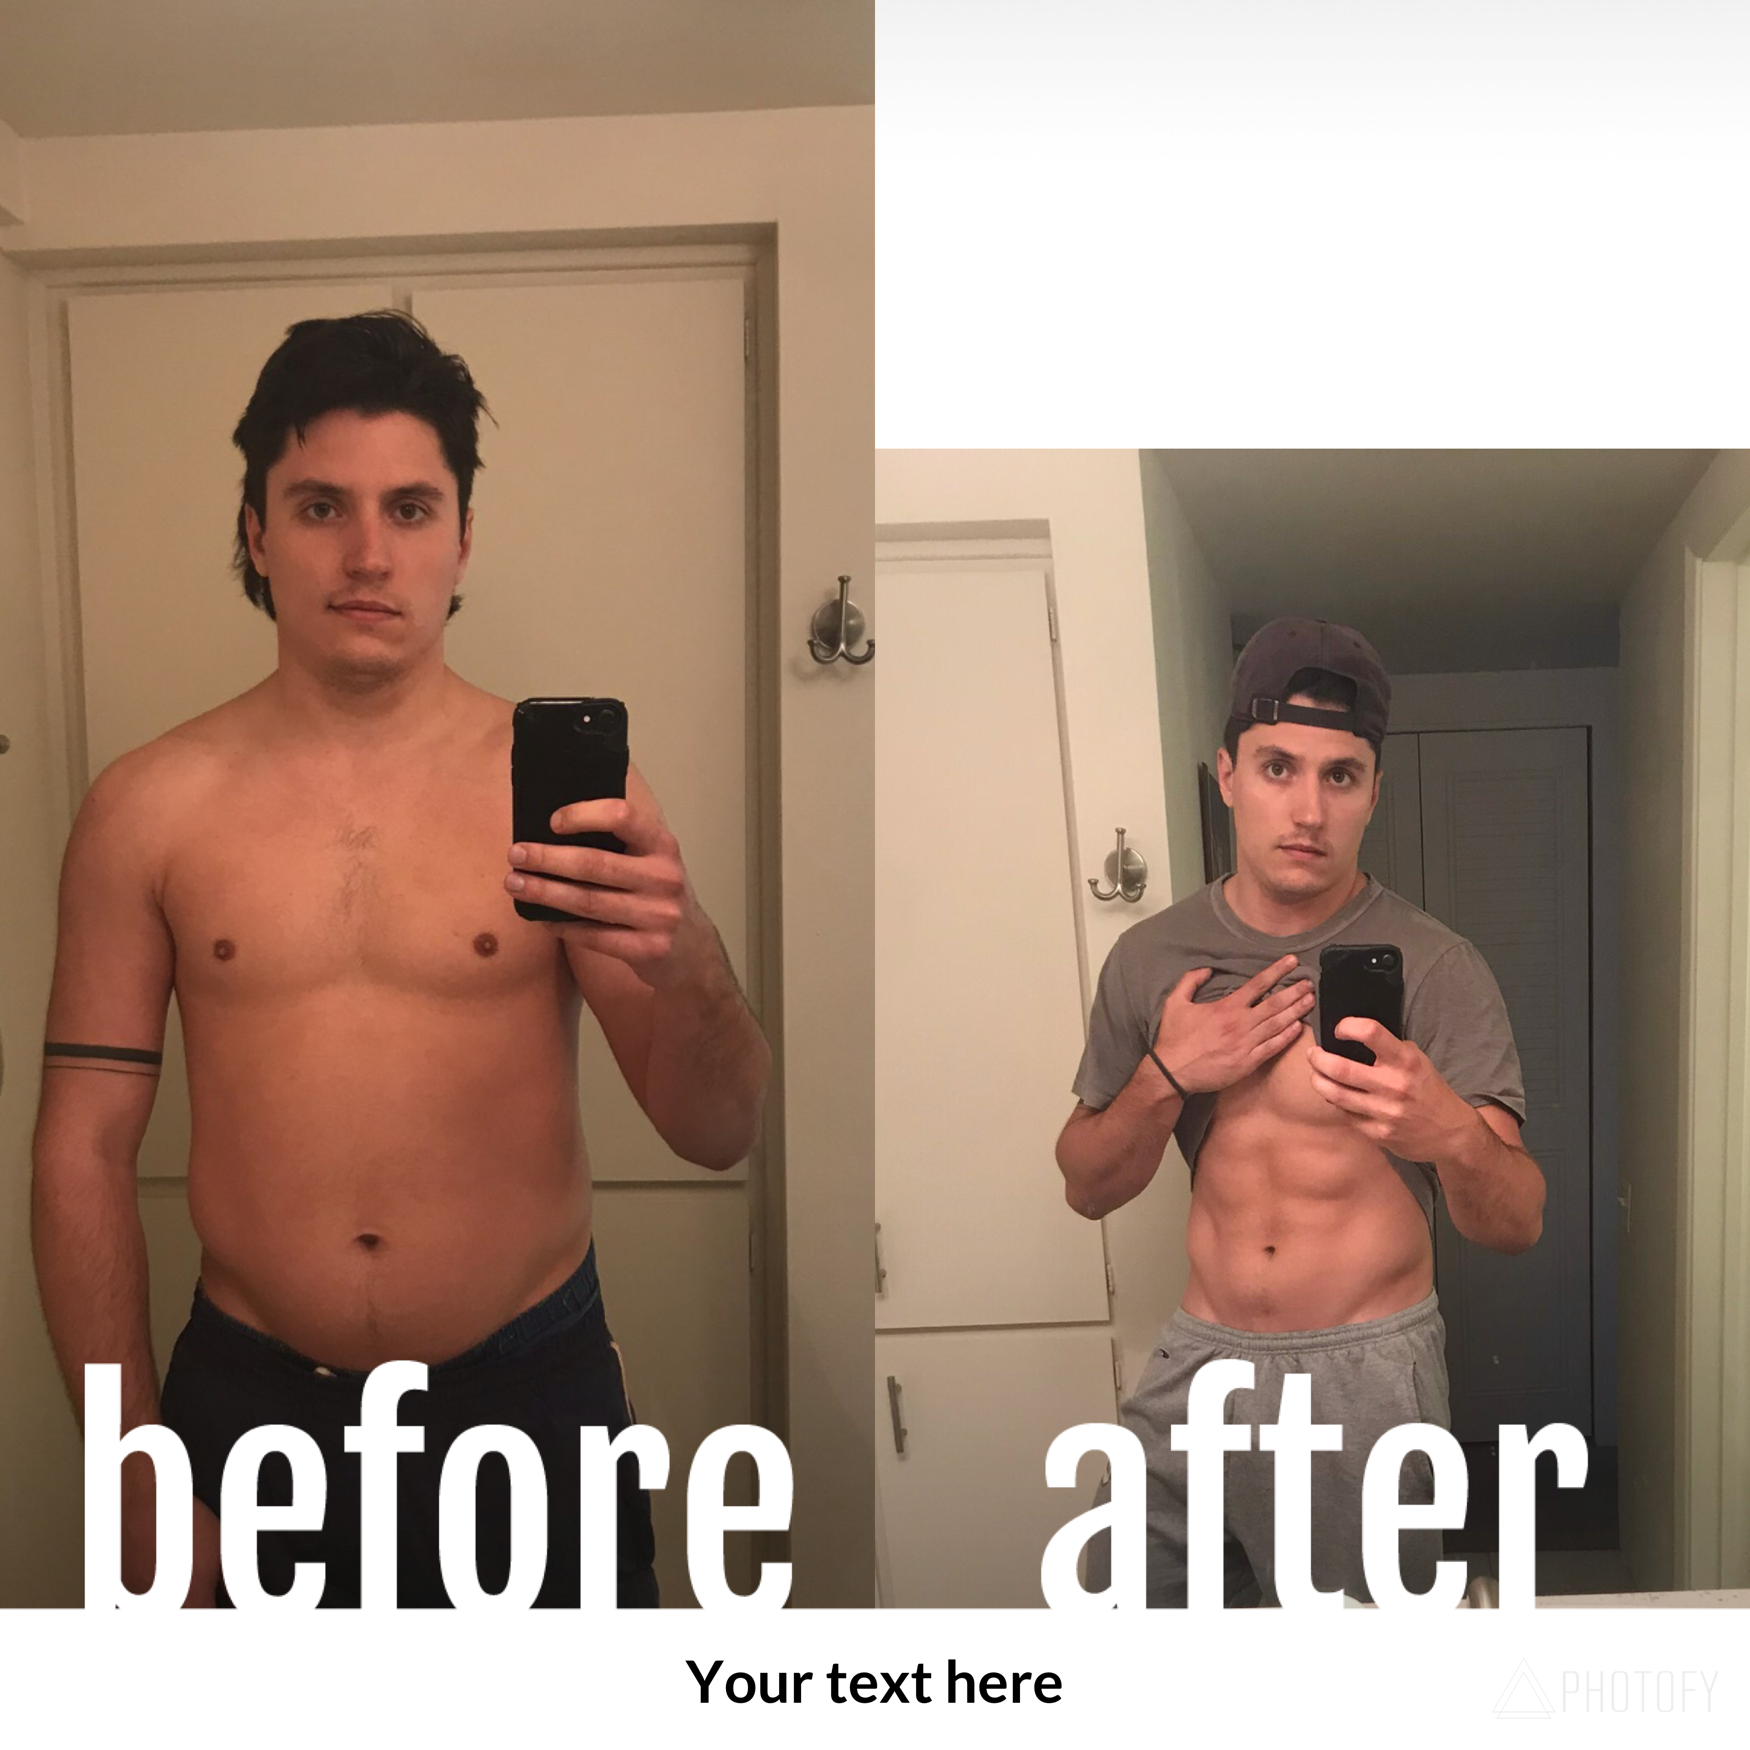 Before and after fitness transformation photo with improved physique.